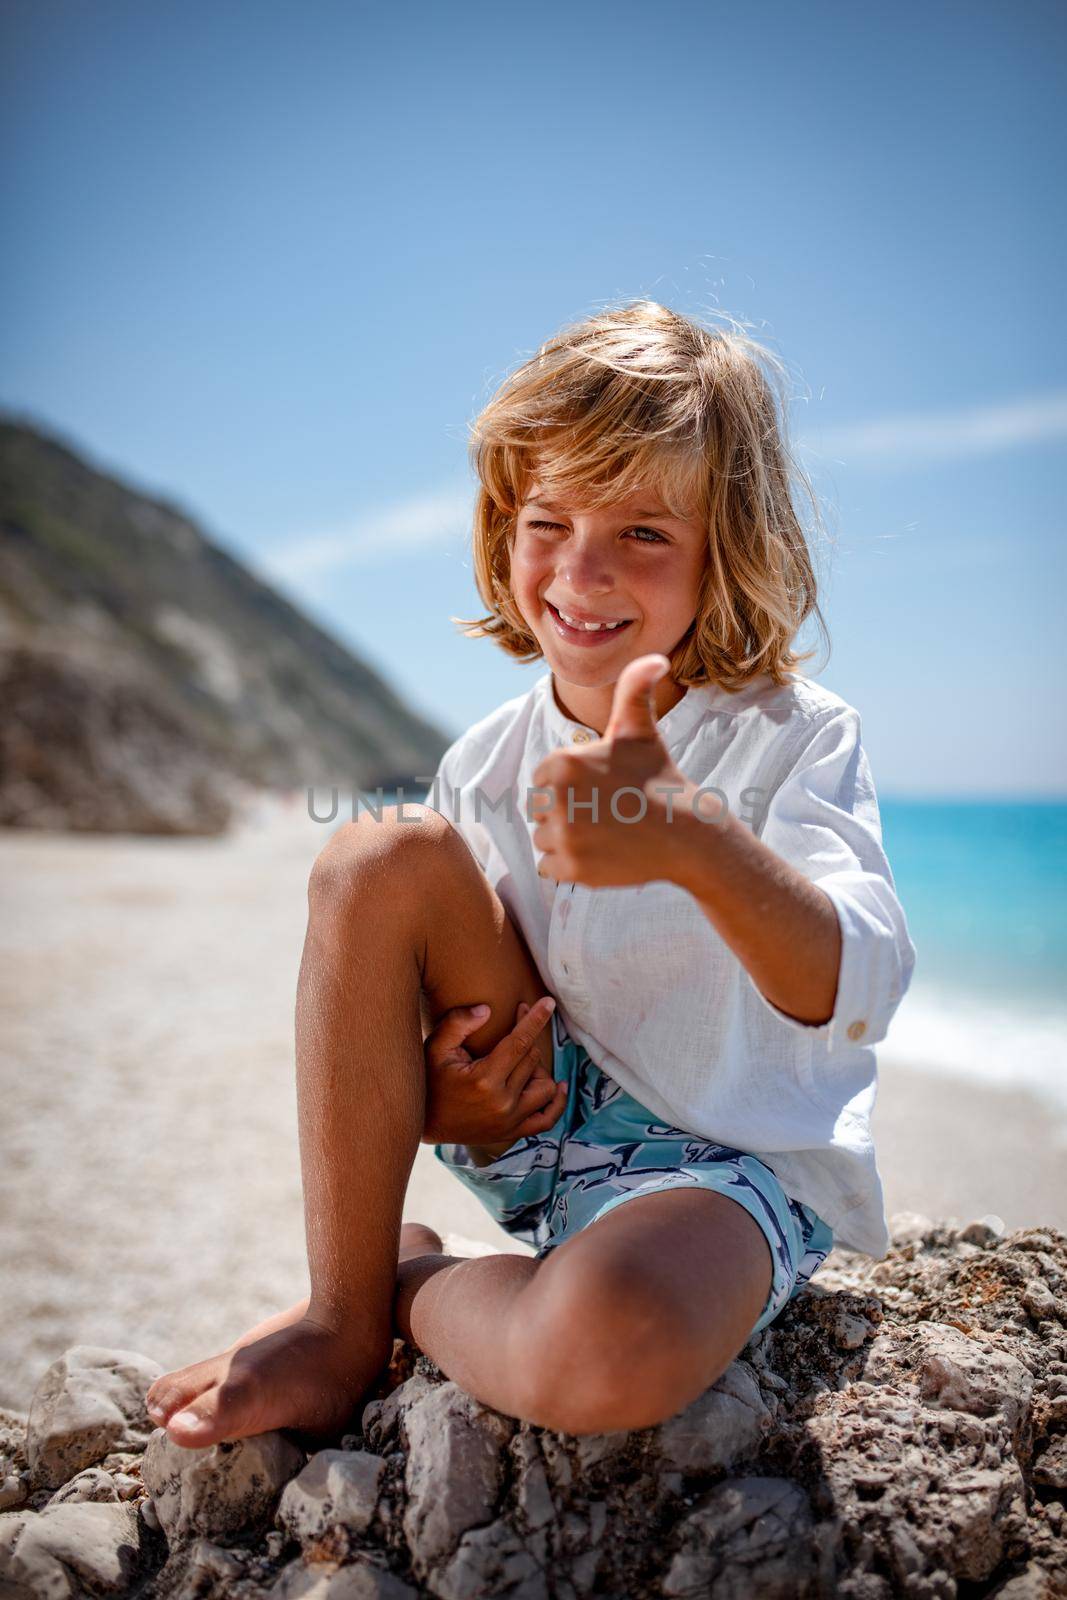 Cute boy is sitting on the sea rock on the beach, showing tumb-up and smiling looking at camera.